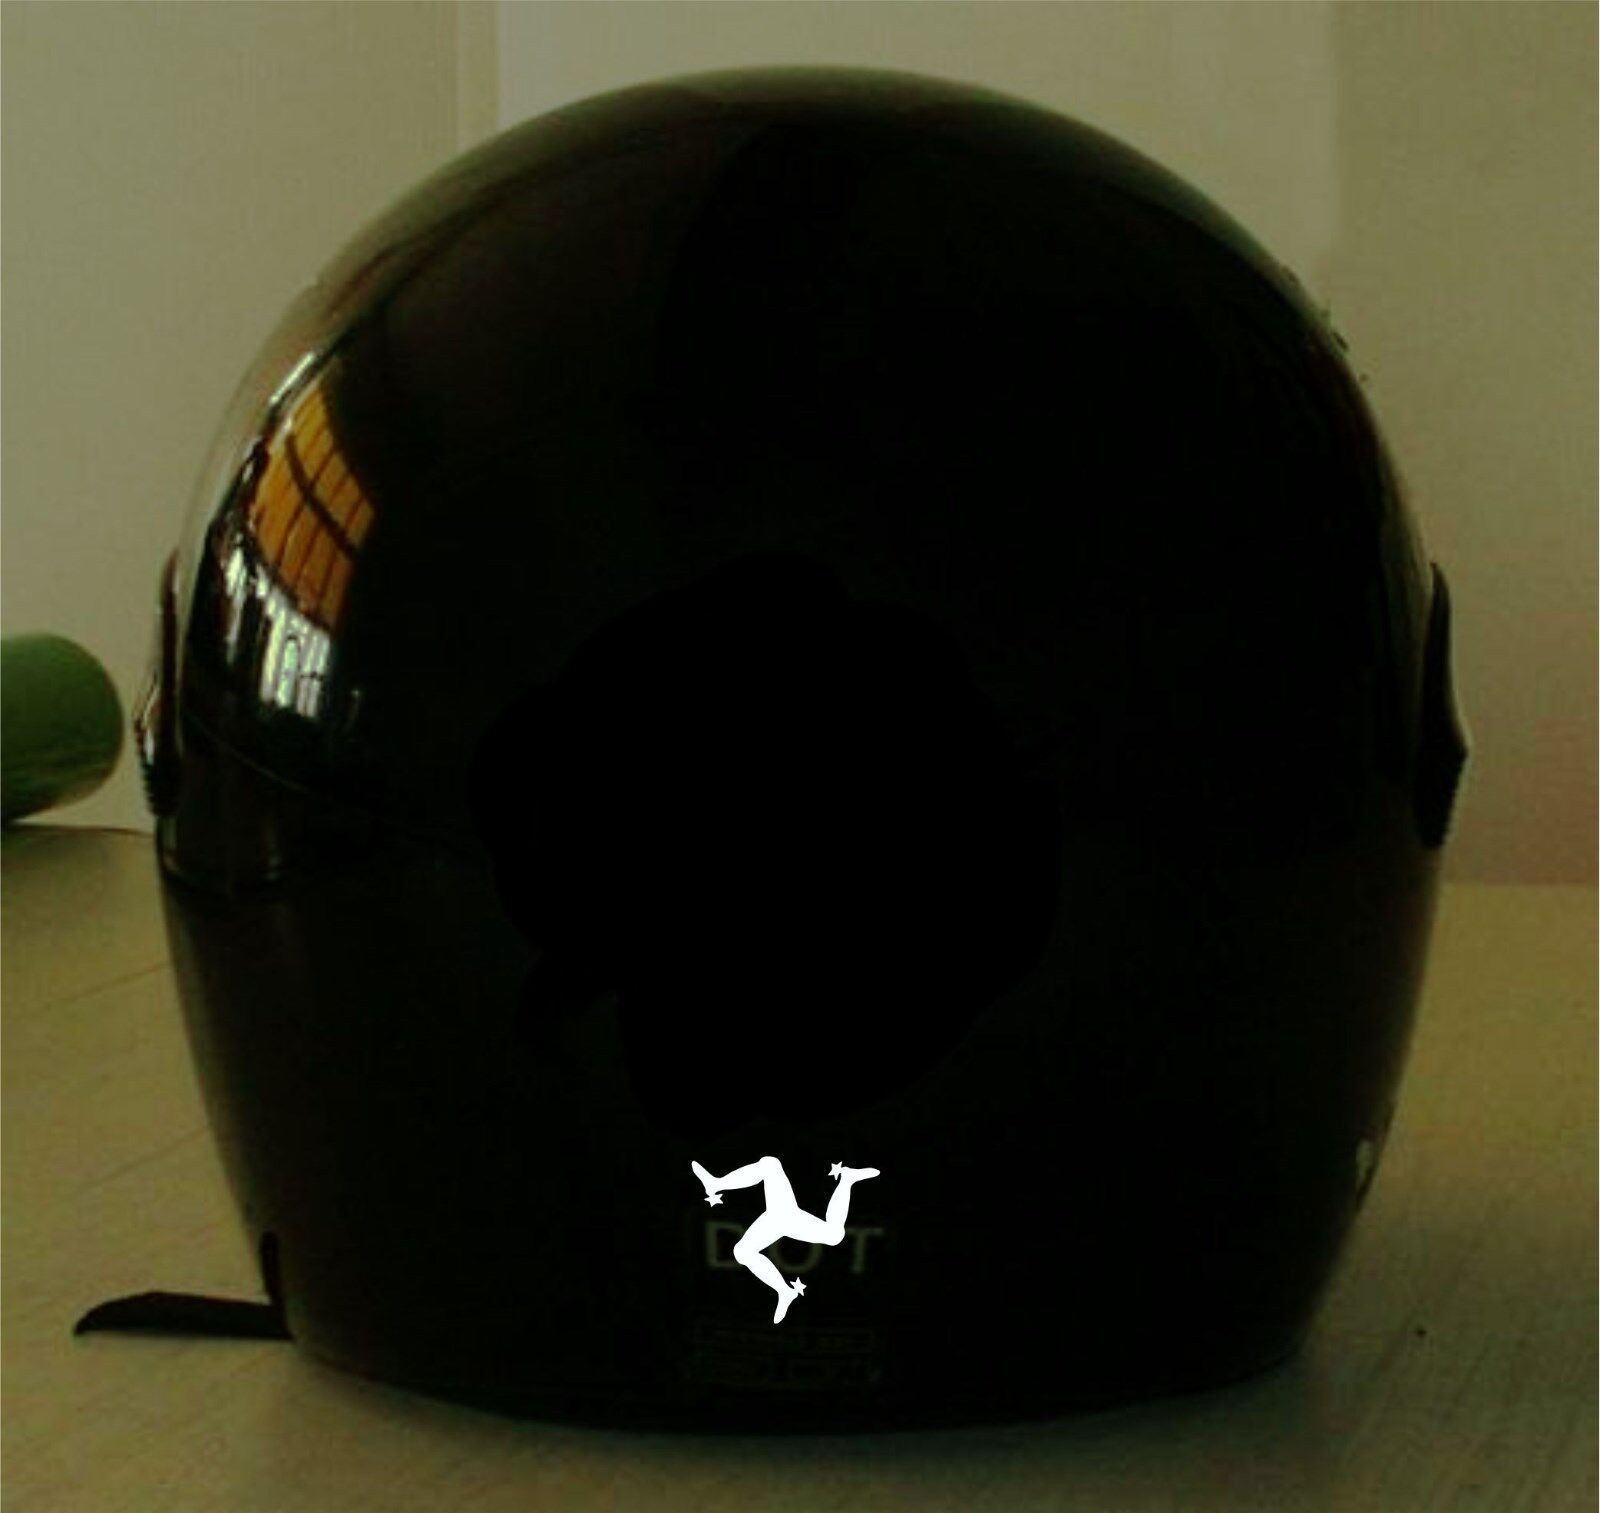 ISLE OF MAN REFLECTIVE MOTORCYCLE HELMET DECAL.2 FOR 1 PRICE